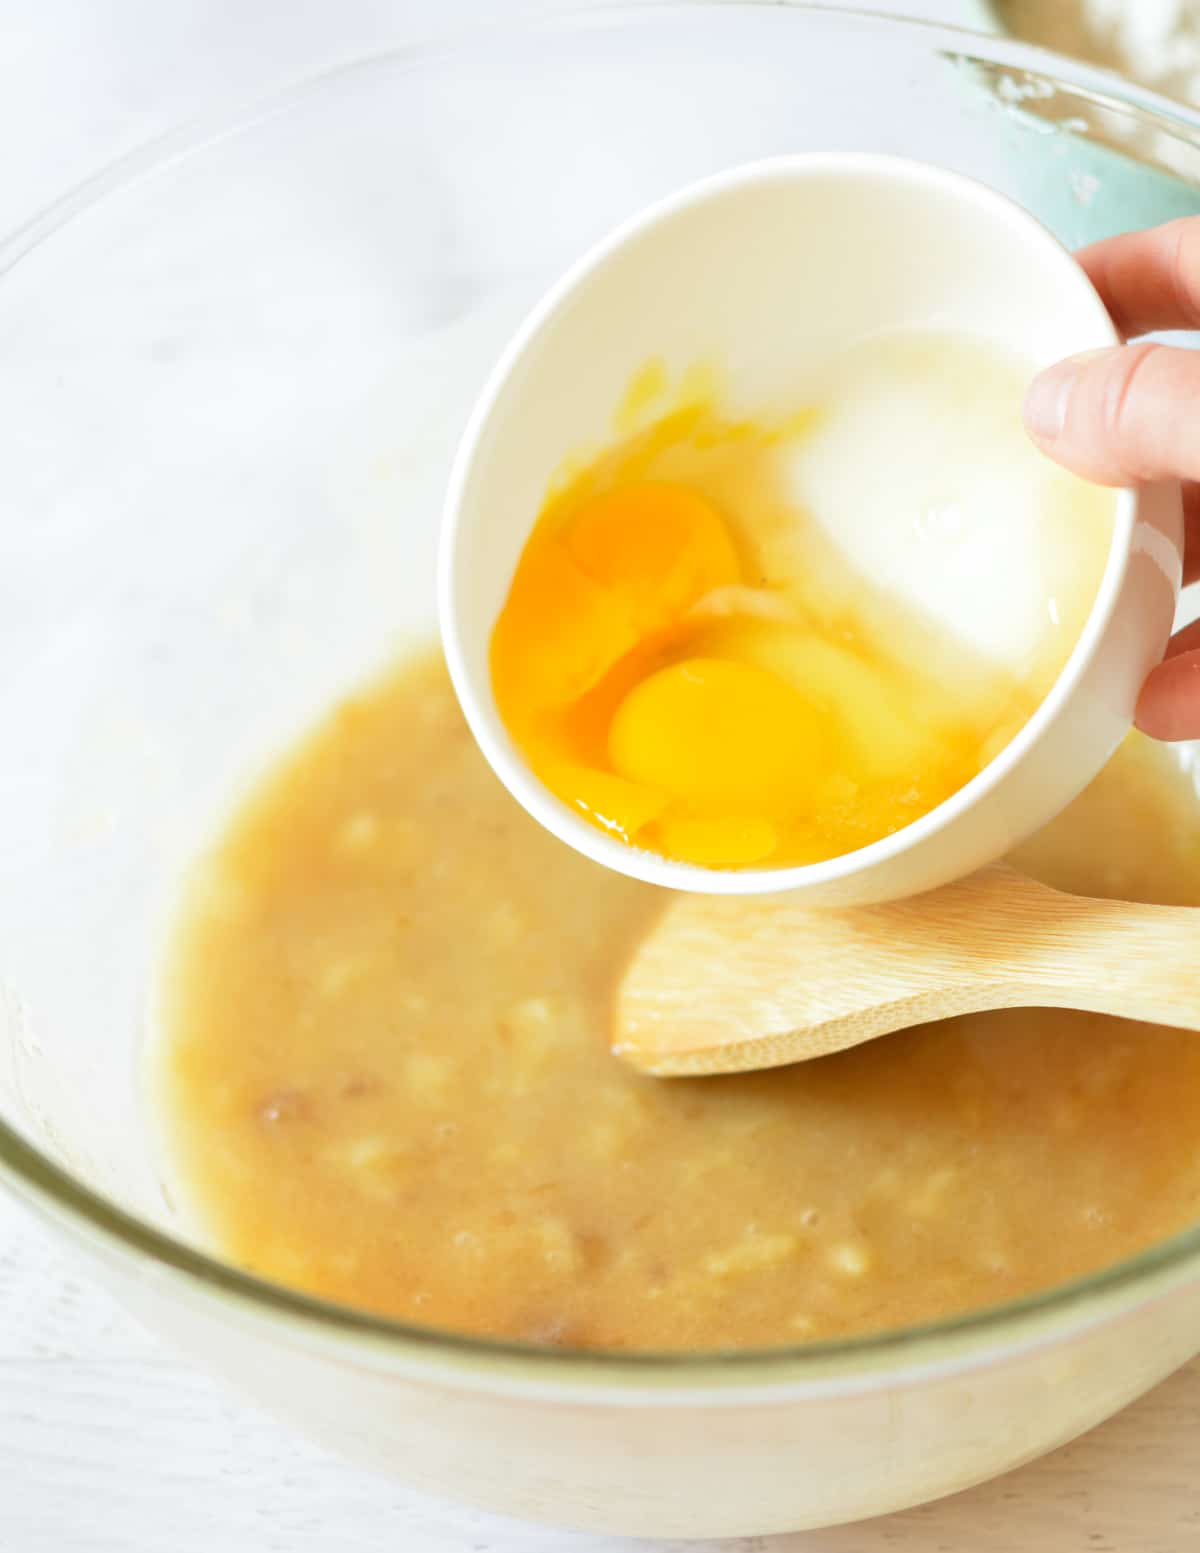 pouring eggs into a bowl of mashed bananas and sugar.